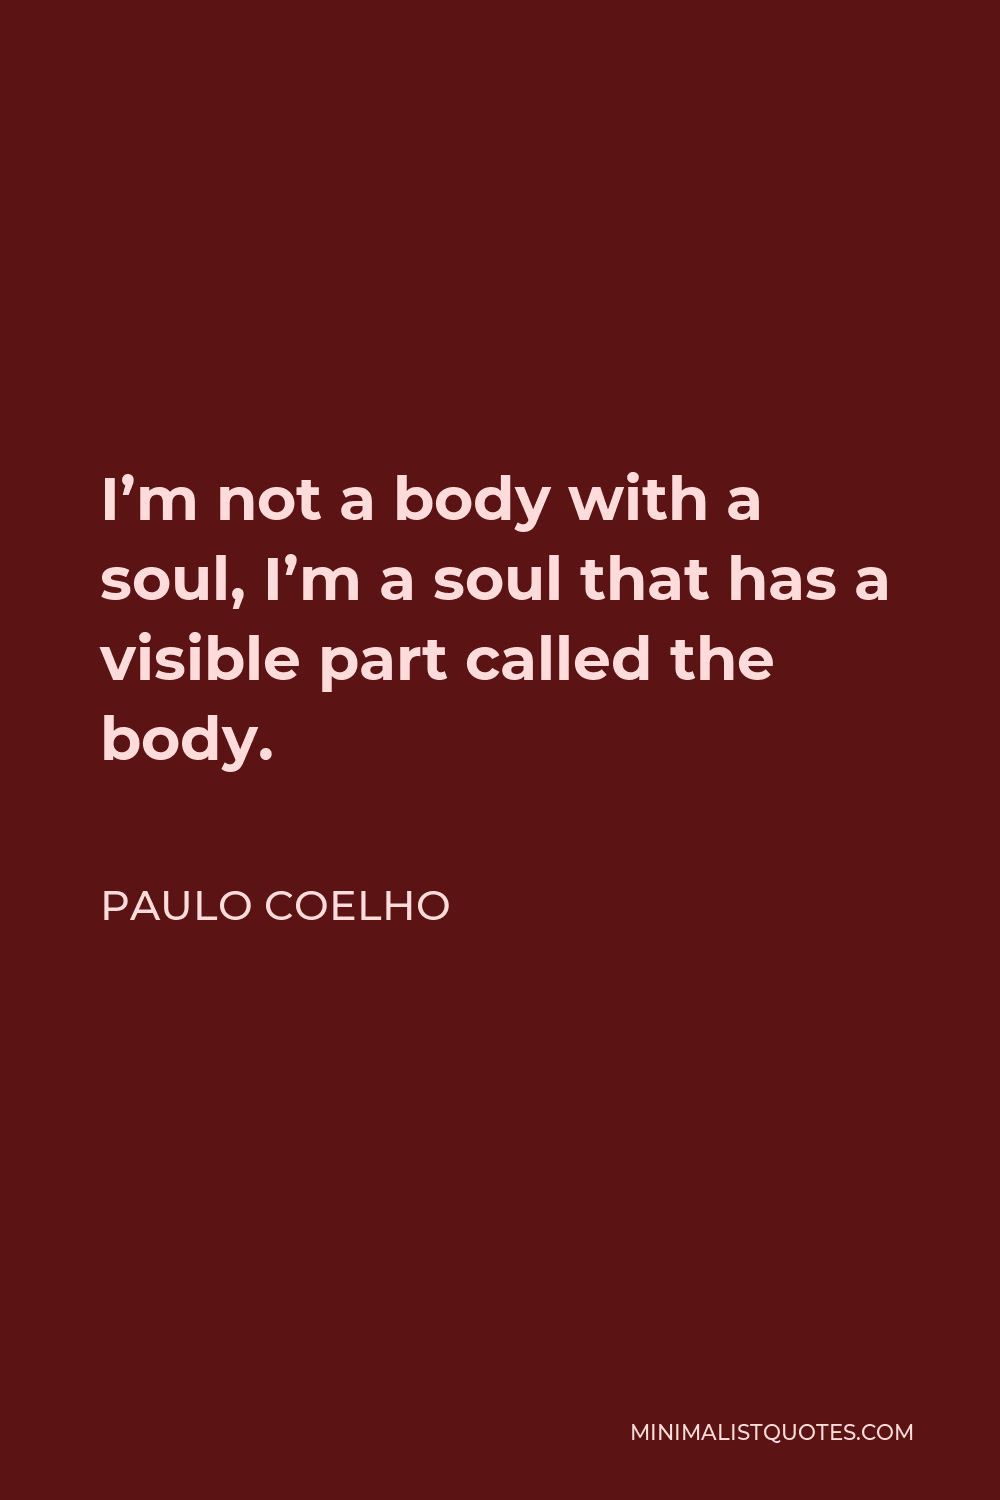 Paulo Coelho Quote - I’m not a body with a soul, I’m a soul that has a visible part called the body.